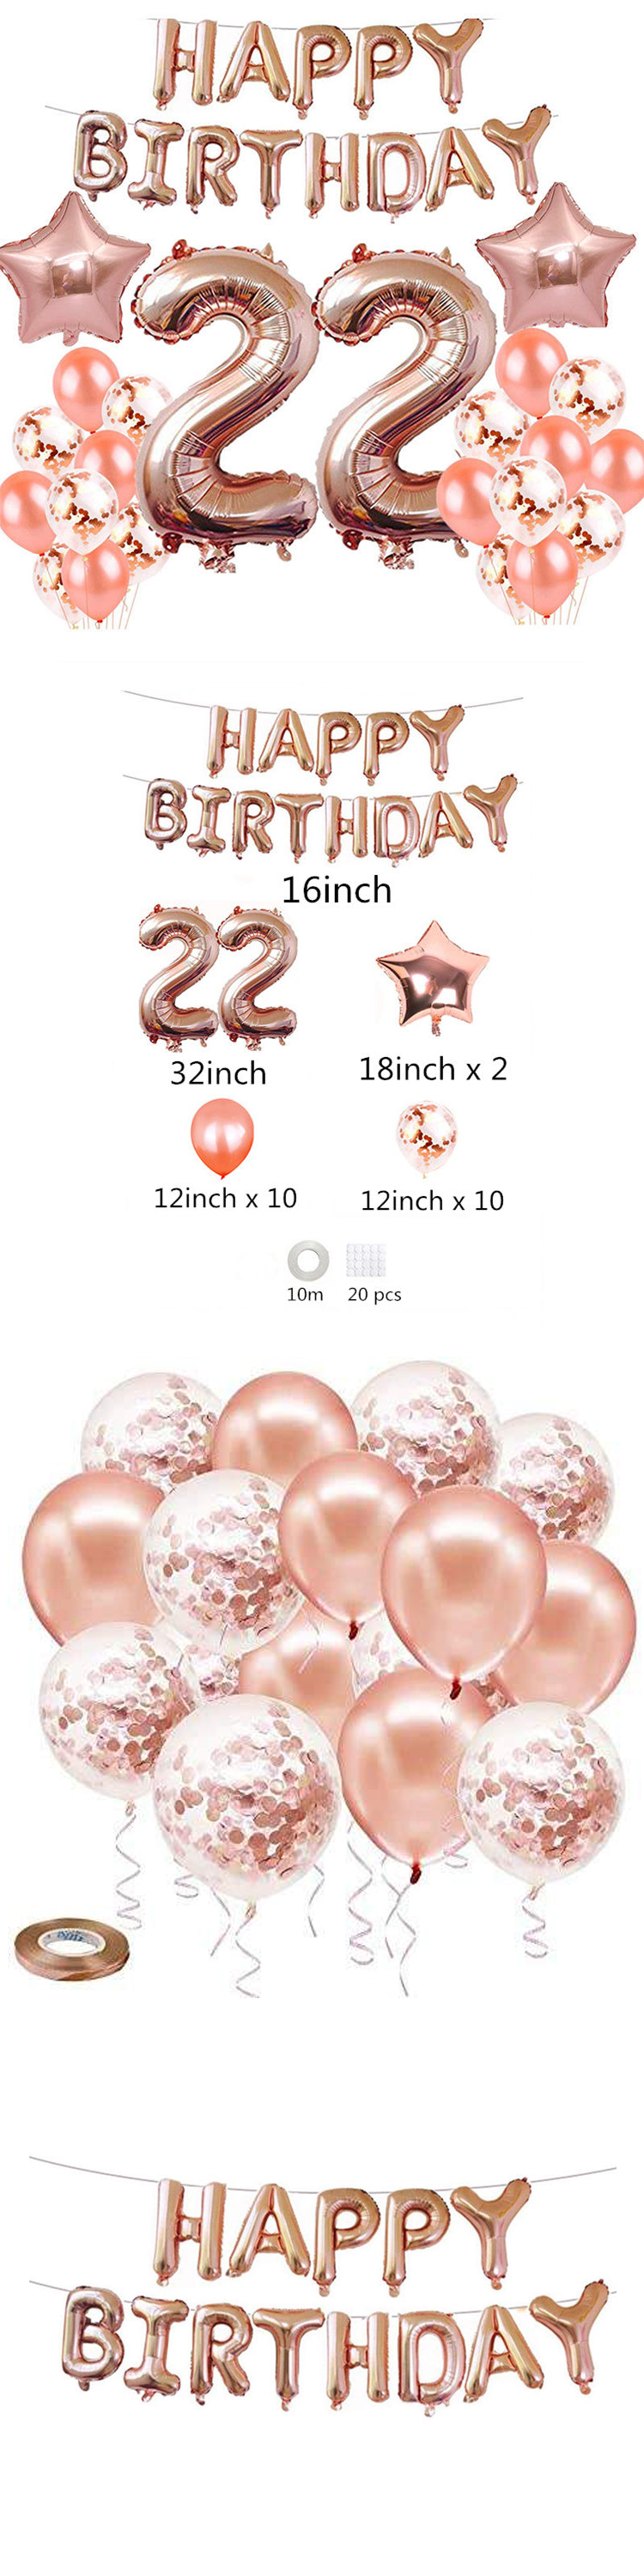 PAFU Graduation Decorations Rose Gold Foil Balloons for Birthday Party Supplies 22nd Birthday Decorations Party Supplies